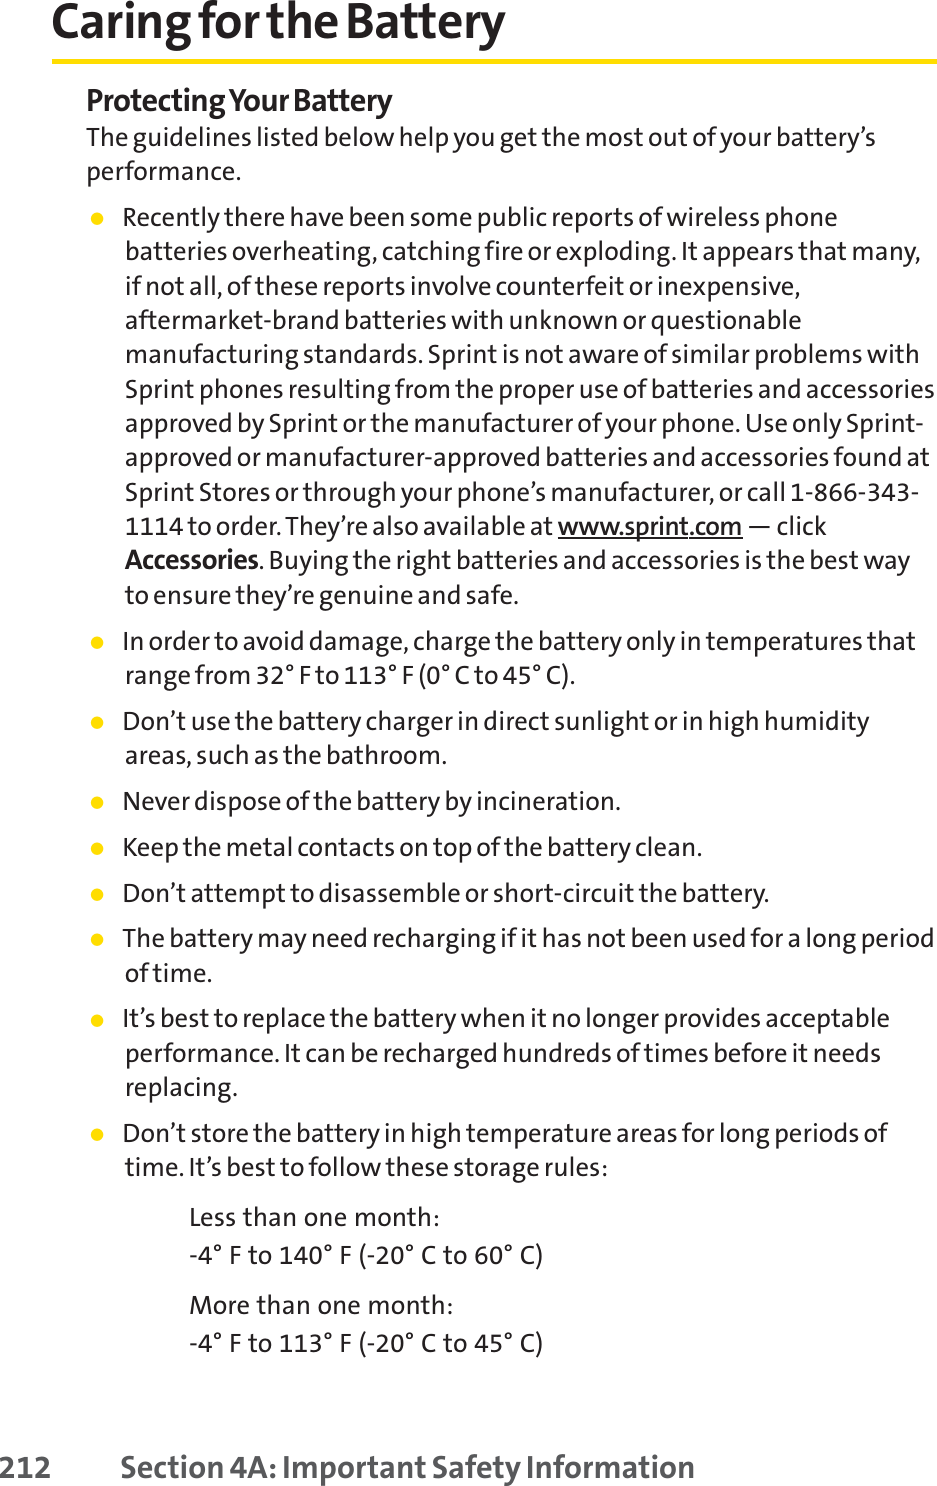 Caring for the BatteryProtecting Your BatteryThe guidelines listed below help you get the most out of your battery’sperformance.䢇Recently there have been some public reports of wireless phonebatteries overheating, catching fire or exploding. It appears that many,if not all, of these reports involve counterfeit or inexpensive,aftermarket-brand batteries with unknown or questionablemanufacturing standards. Sprint is not aware of similar problems withSprint phones resulting from the proper use of batteries and accessoriesapproved by Sprint or the manufacturer of your phone. Use only Sprint-approved or manufacturer-approved batteries and accessories found atSprint Stores or through your phone’s manufacturer, or call 1-866-343-1114 to order. They’re also available at www.sprint.com — clickAccessories. Buying the right batteries and accessories is the best wayto ensure they’re genuine and safe.䢇In order to avoid damage, charge the battery only in temperatures thatrange from 32° F to 113° F (0° C to 45° C).䢇Don’t use the battery charger in direct sunlight or in high humidityareas, such as the bathroom.䢇Never dispose of the battery by incineration.䢇Keep the metal contacts on top of the battery clean.䢇Don’t attempt to disassemble or short-circuit the battery.䢇The battery may need recharging if it has not been used for a long periodof time.䢇It’s best to replace the battery when it no longer provides acceptableperformance. It can be recharged hundreds of times before it needsreplacing.䢇Don’t store the battery in high temperature areas for long periods oftime. It’s best to follow these storage rules:Less than one month:-4° F to 140° F (-20° C to 60° C)More than one month:-4° F to 113° F (-20° C to 45° C)212 Section 4A: Important Safety Information